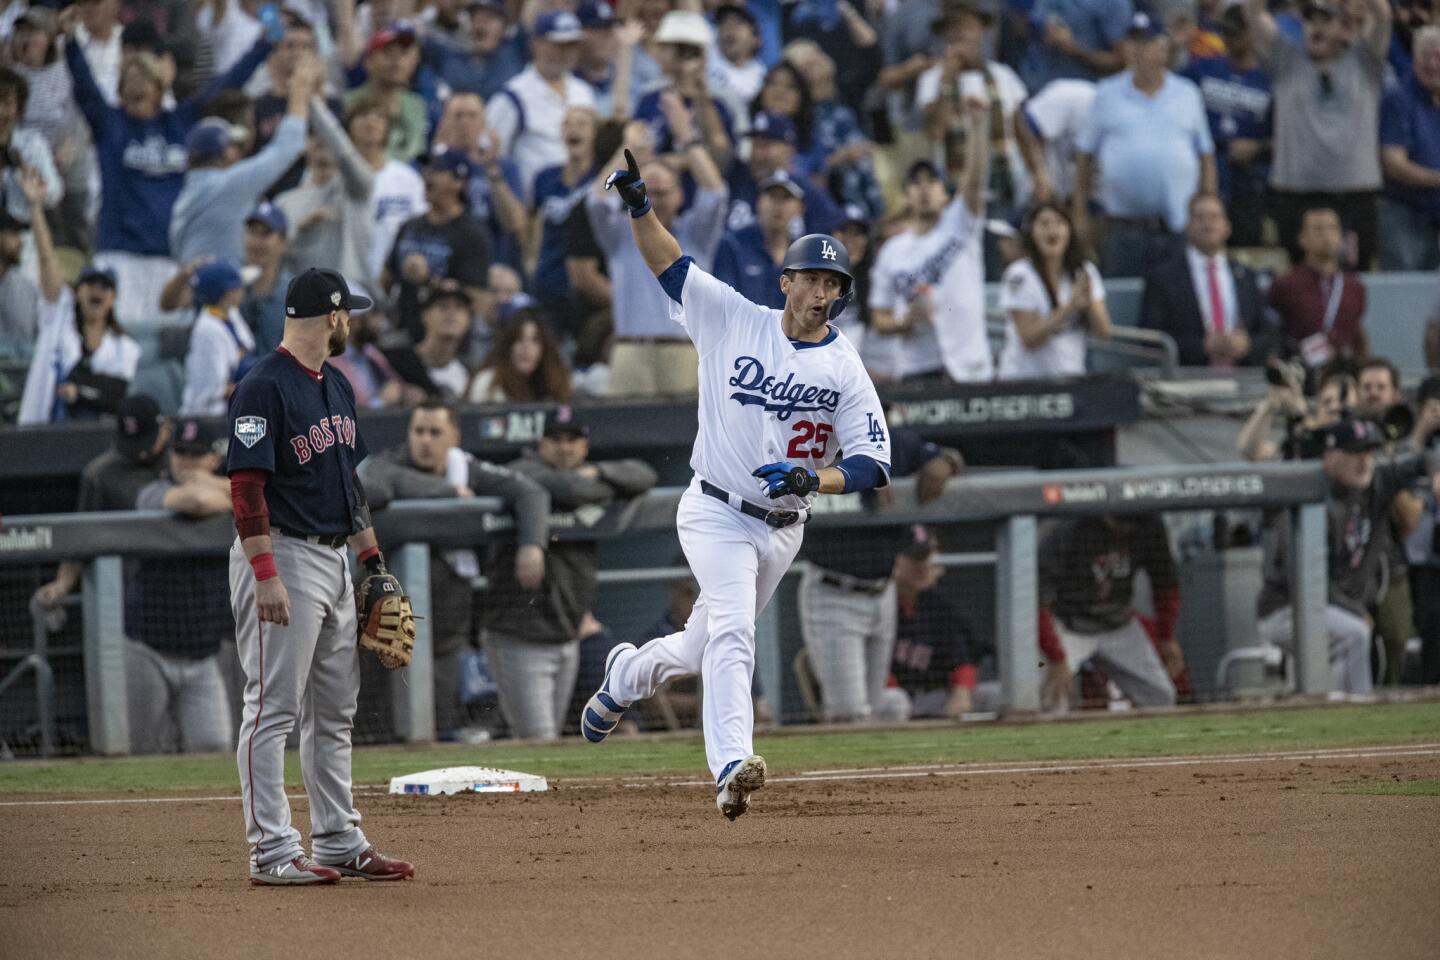 Dodgers first baseman David Freese reacts after hitting a solo homer in the first inning.